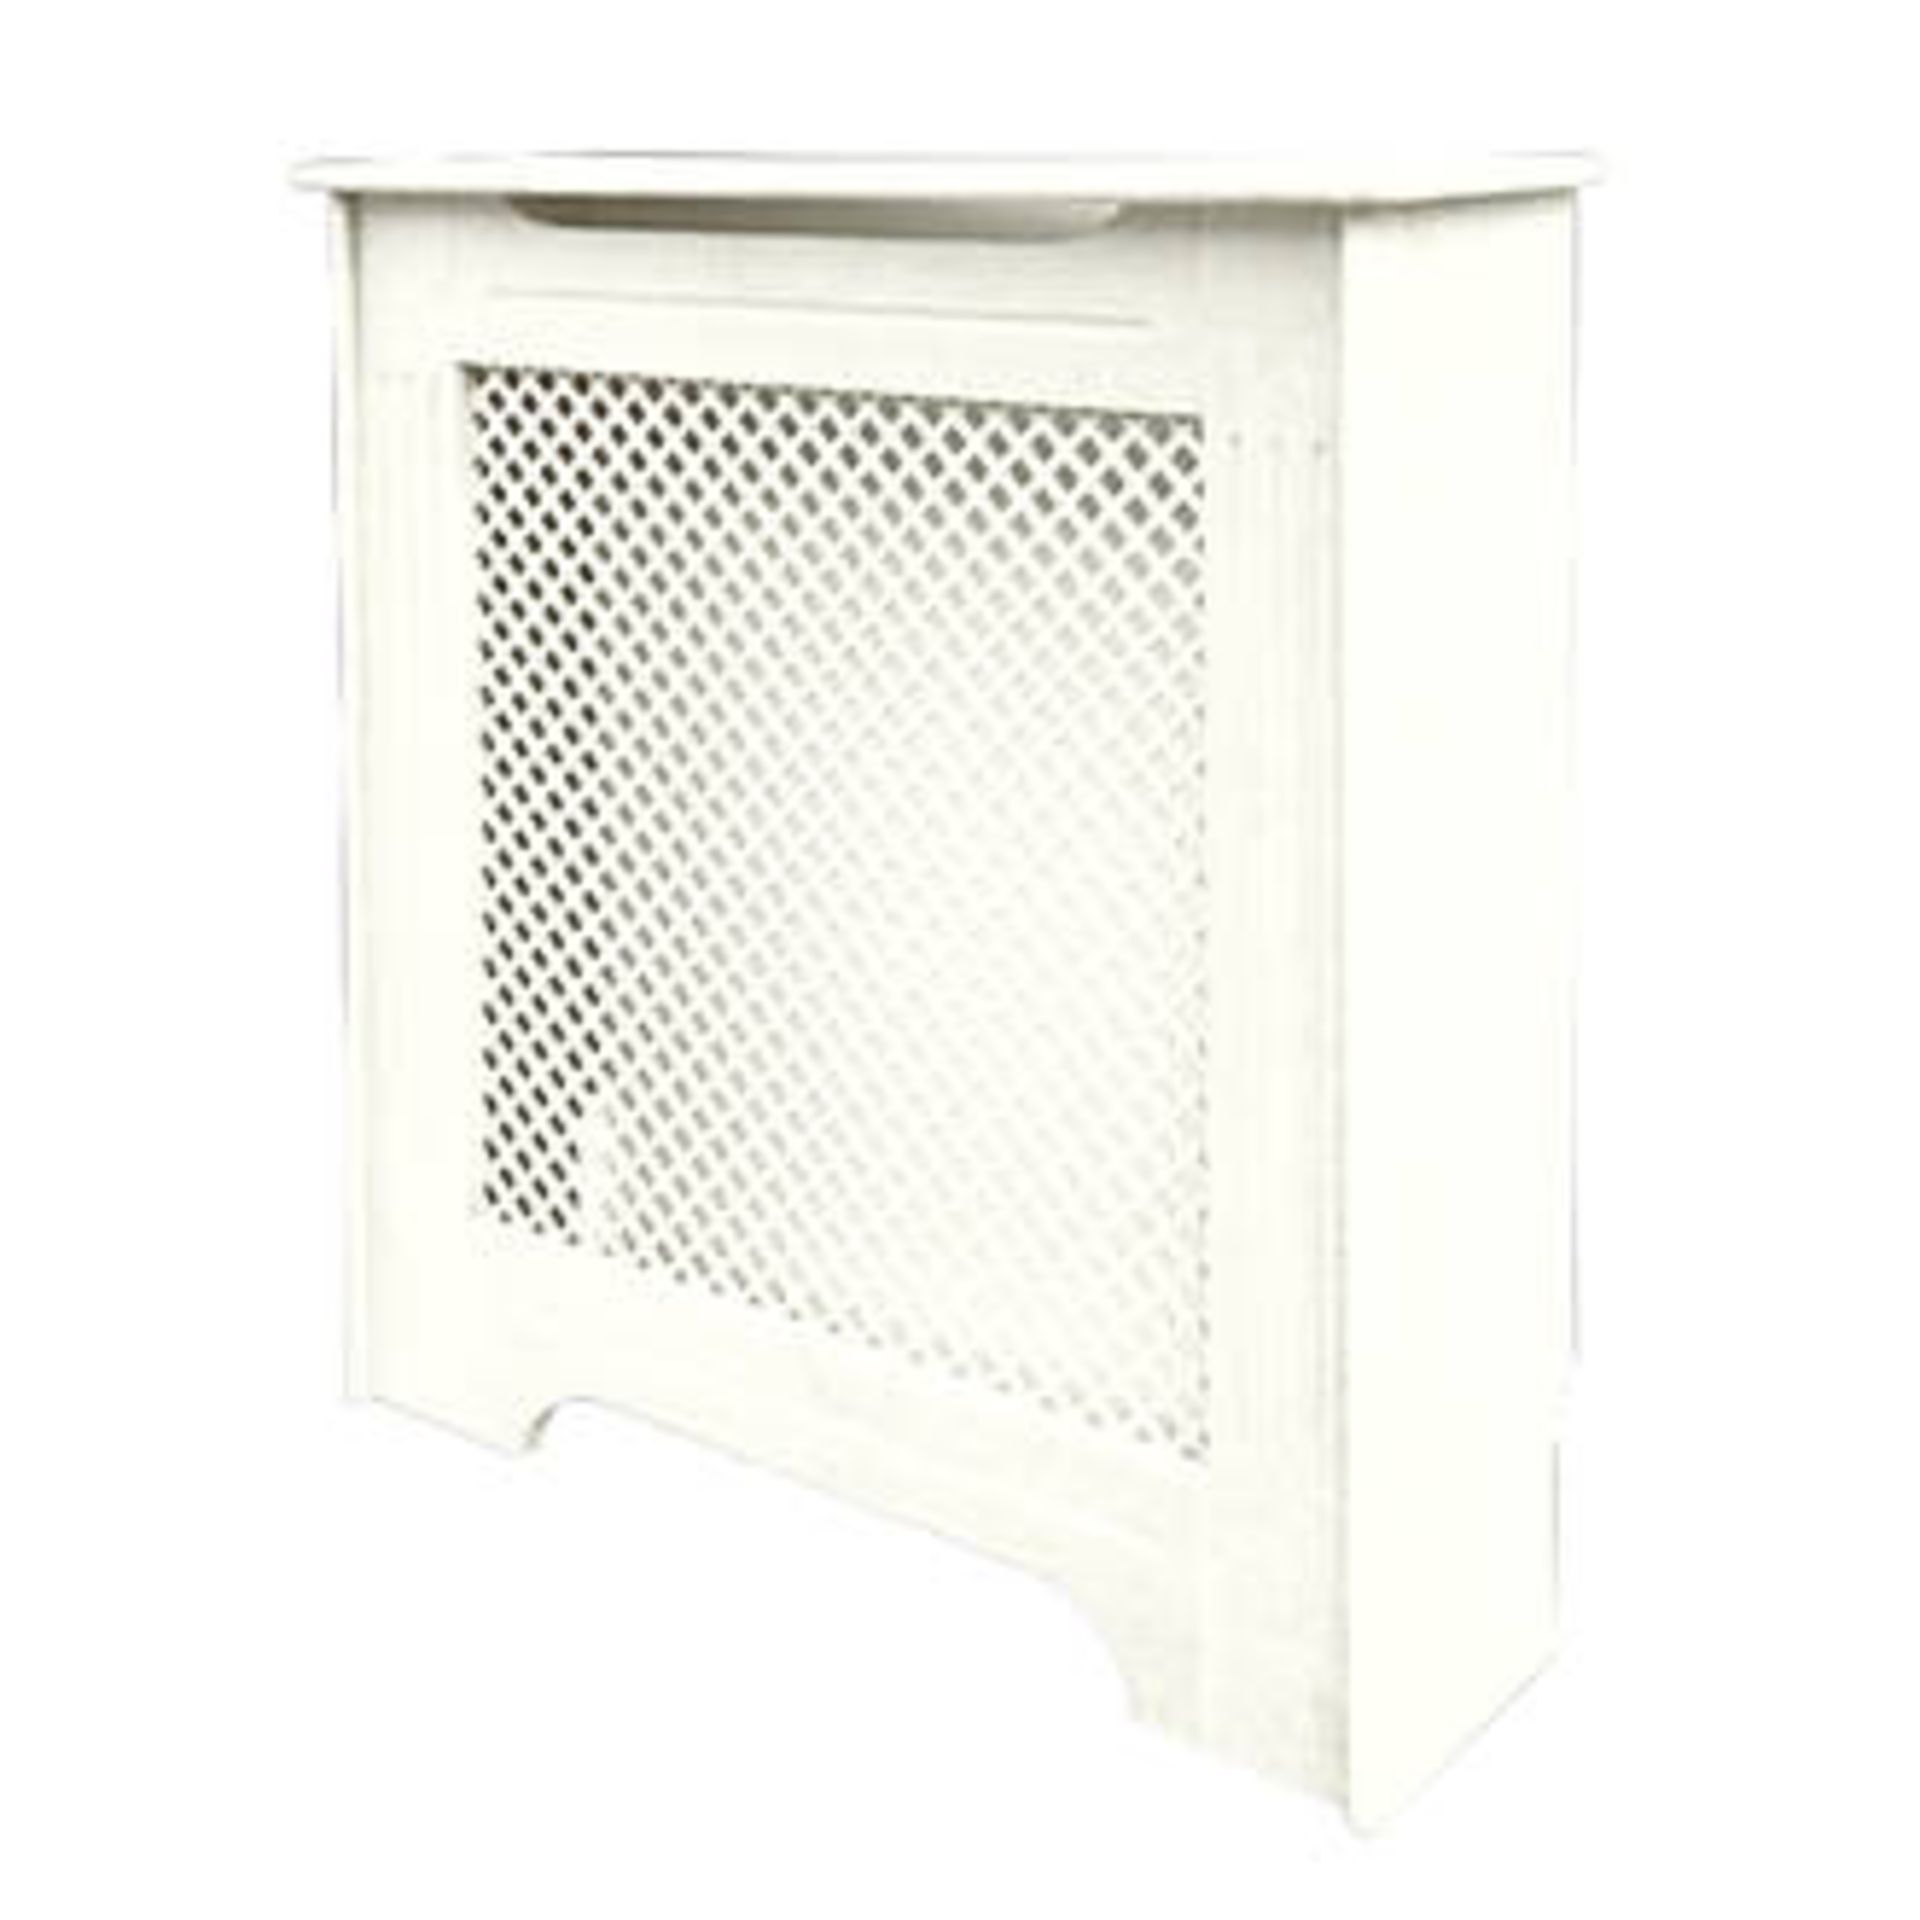 (LL86) 820 X 210 X 868MM VICTORIAN RADIATOR CABINET WHITE. White finish. Provides a practical